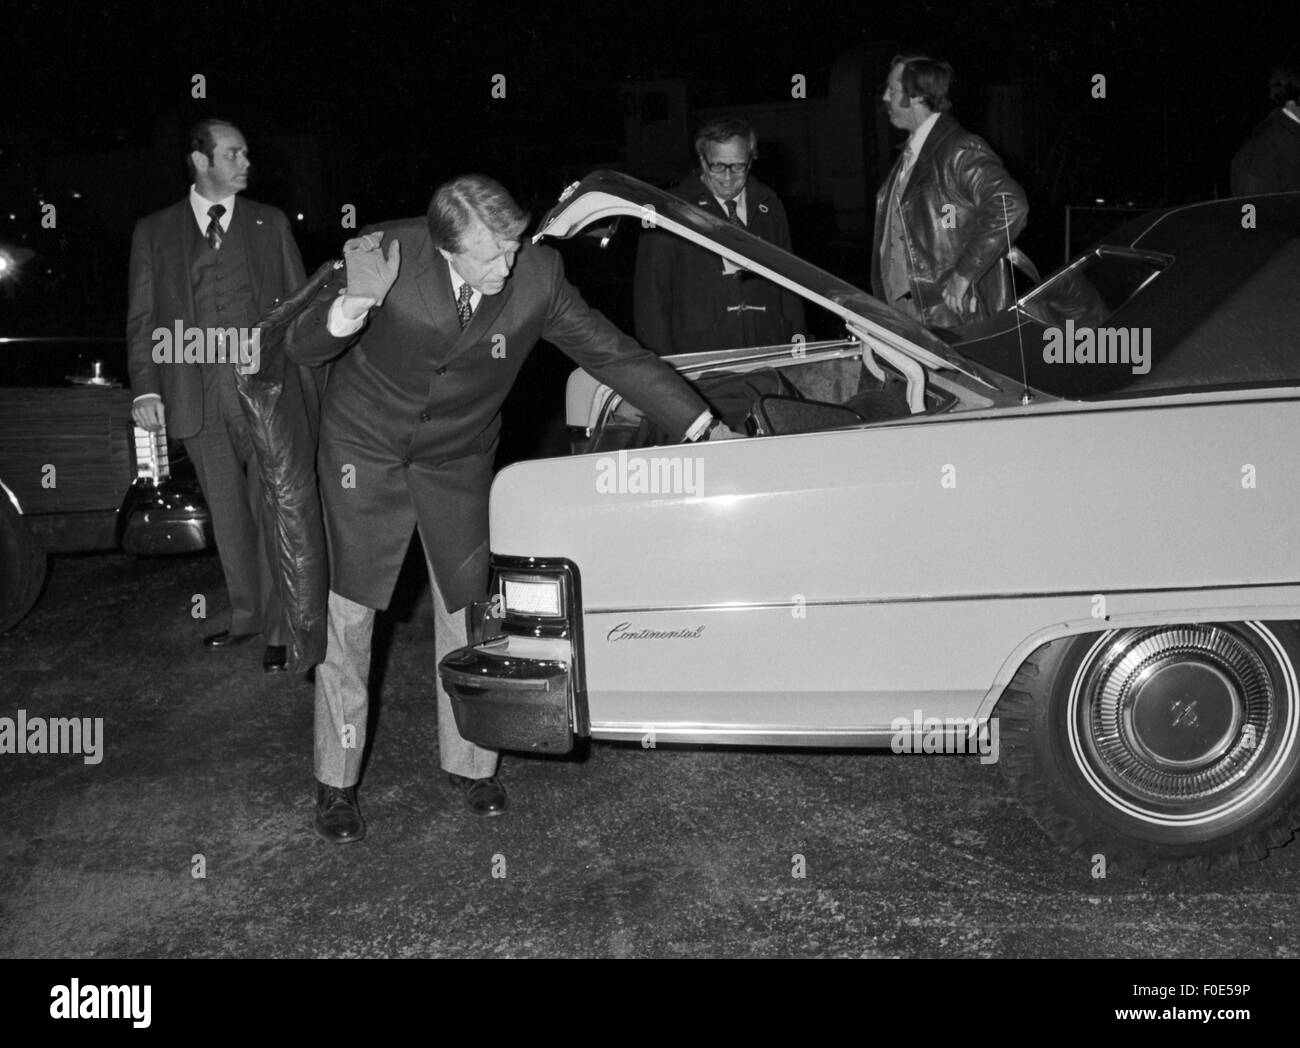 Jan. 2, 1977 - USA - Governor Jimmy Carter - insistant on carrying his own bags - lands on a campaign stop in Illinois. (Credit Image: © Ken Hawkins via ZUMA Wire) Stock Photo